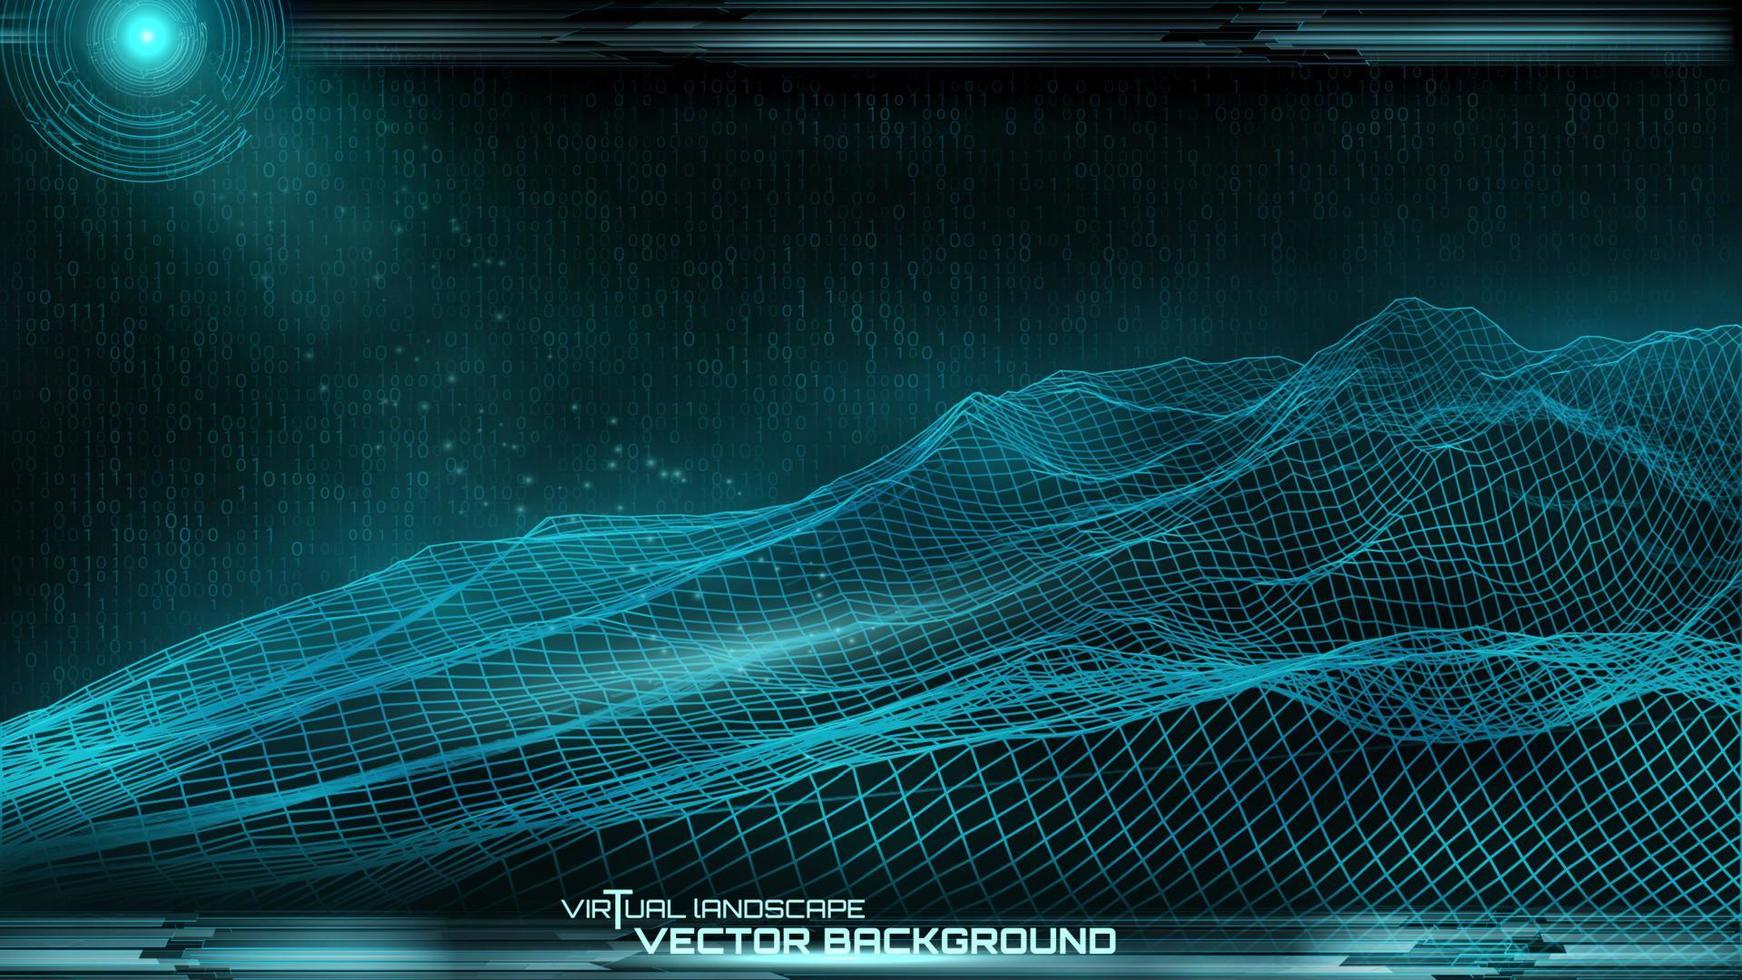 Cyberspace landscape mesh vector background